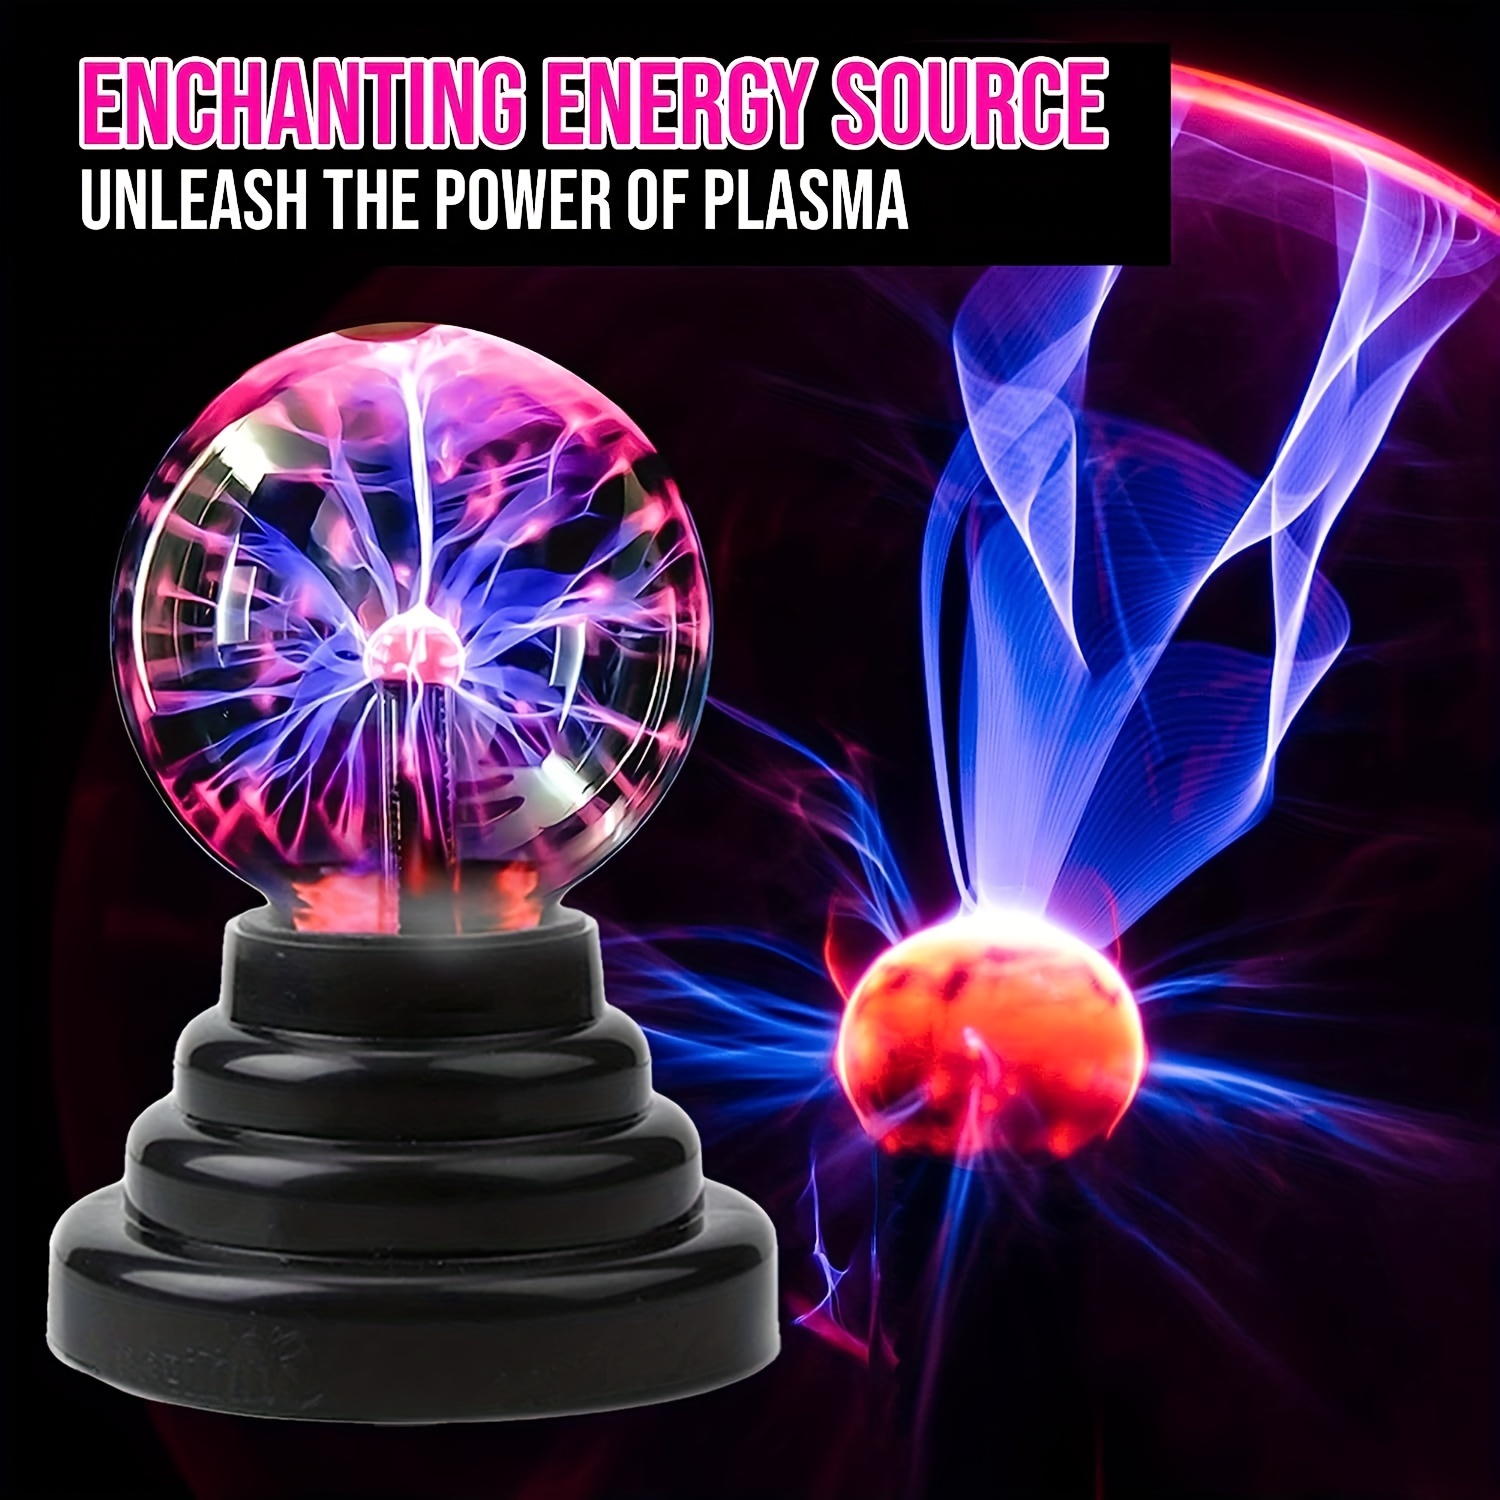 

1pc Plasma Globe Lamp With Interactive Electronic Touch And Sound Sensitive Lightning And Tesla Coil, Glass Stem Lava Lamp-style Light For Desk, Plasma Ball, And More